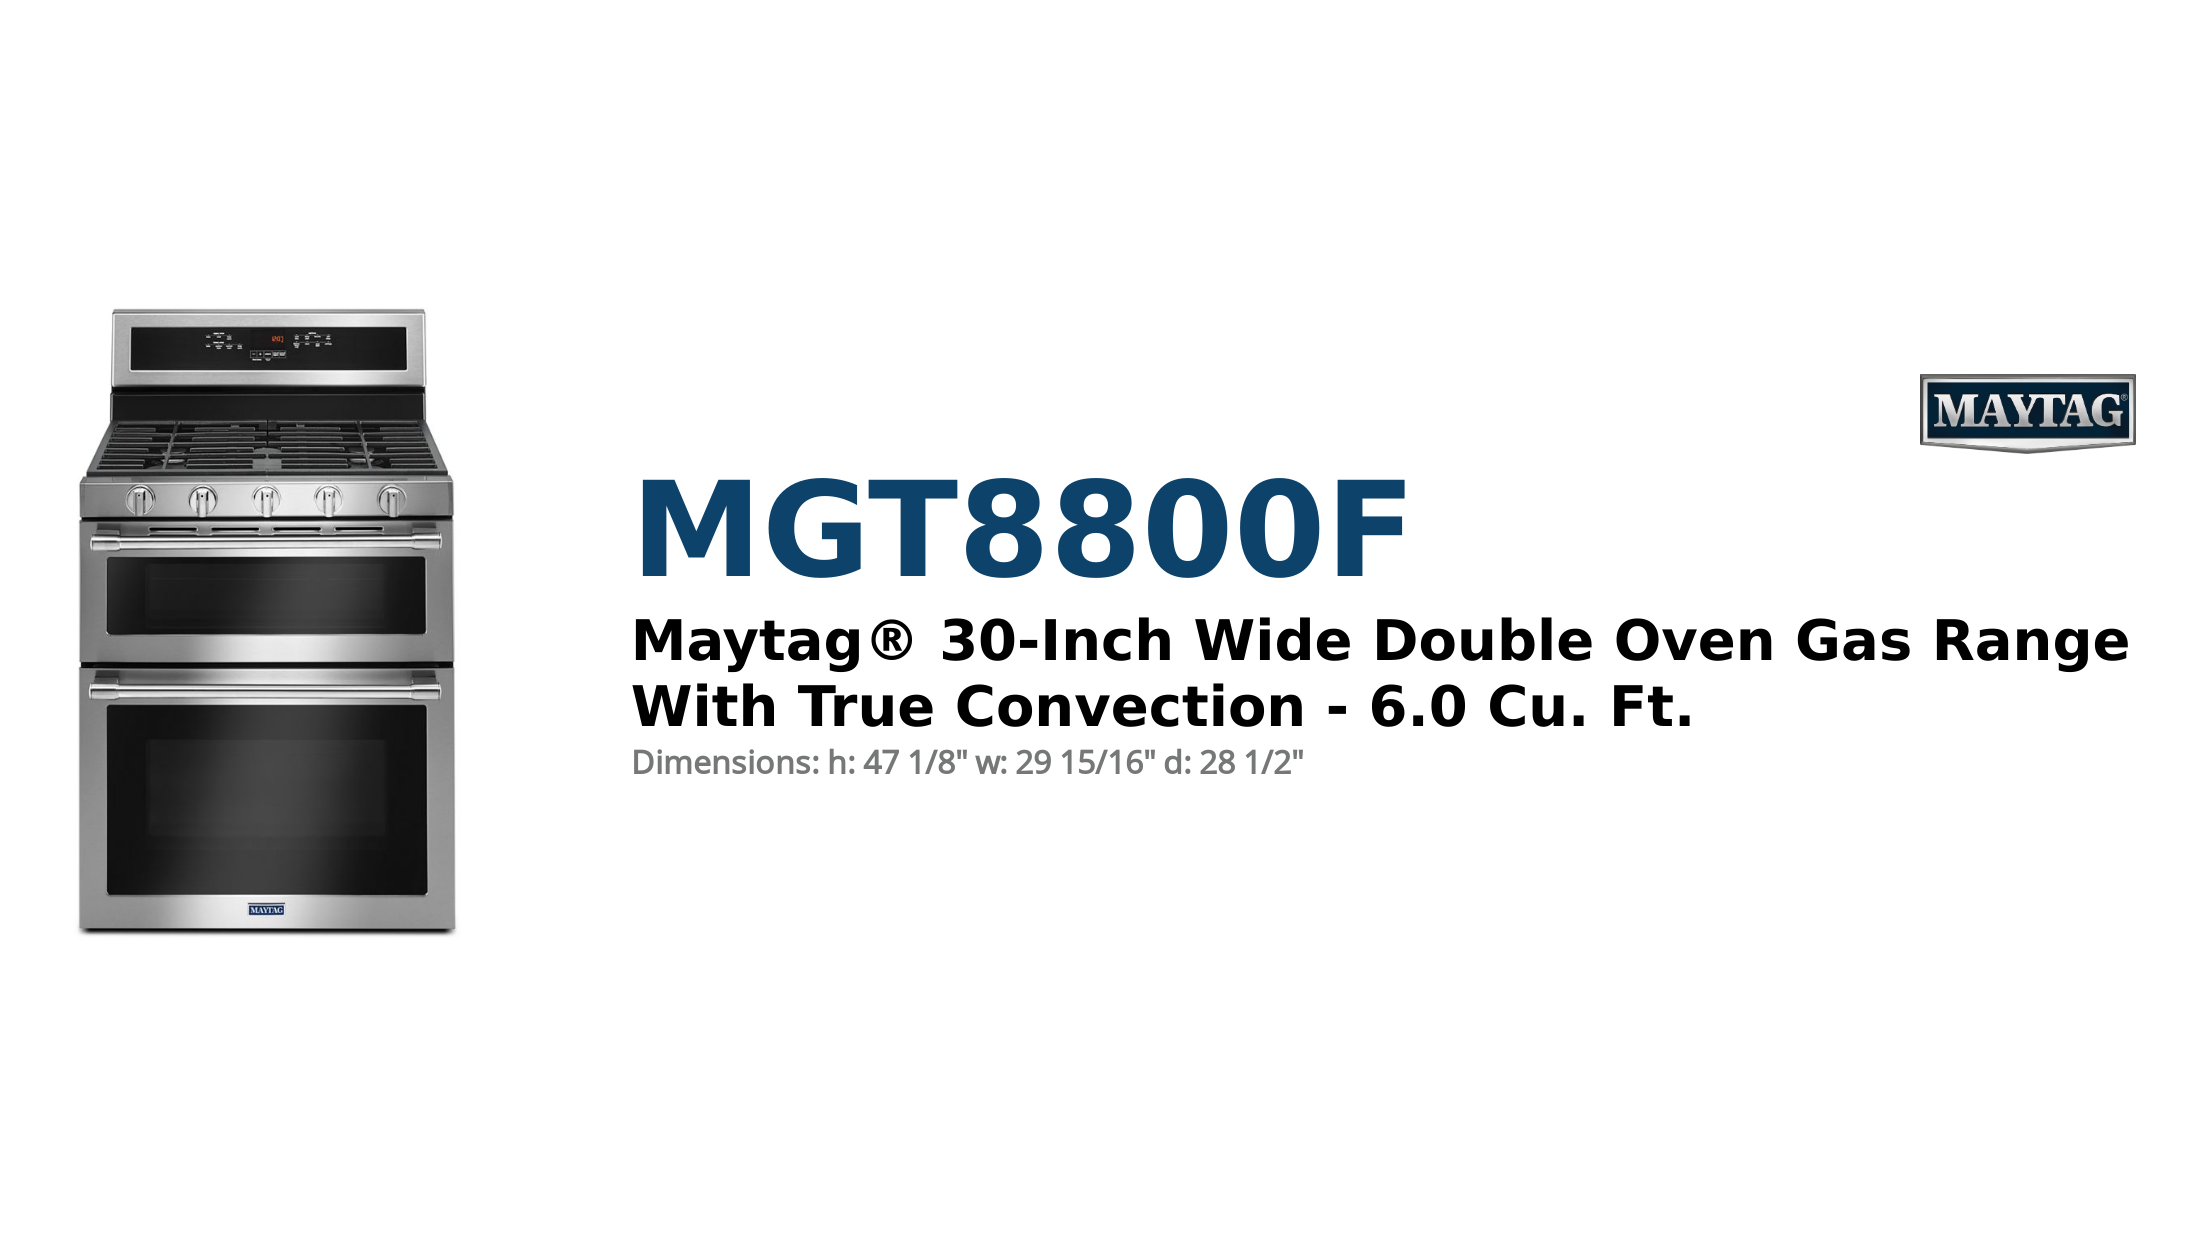 Maytag® 30-Inch Wide Double Oven Gas Range With True Convection - 6.0 Cu. Ft.